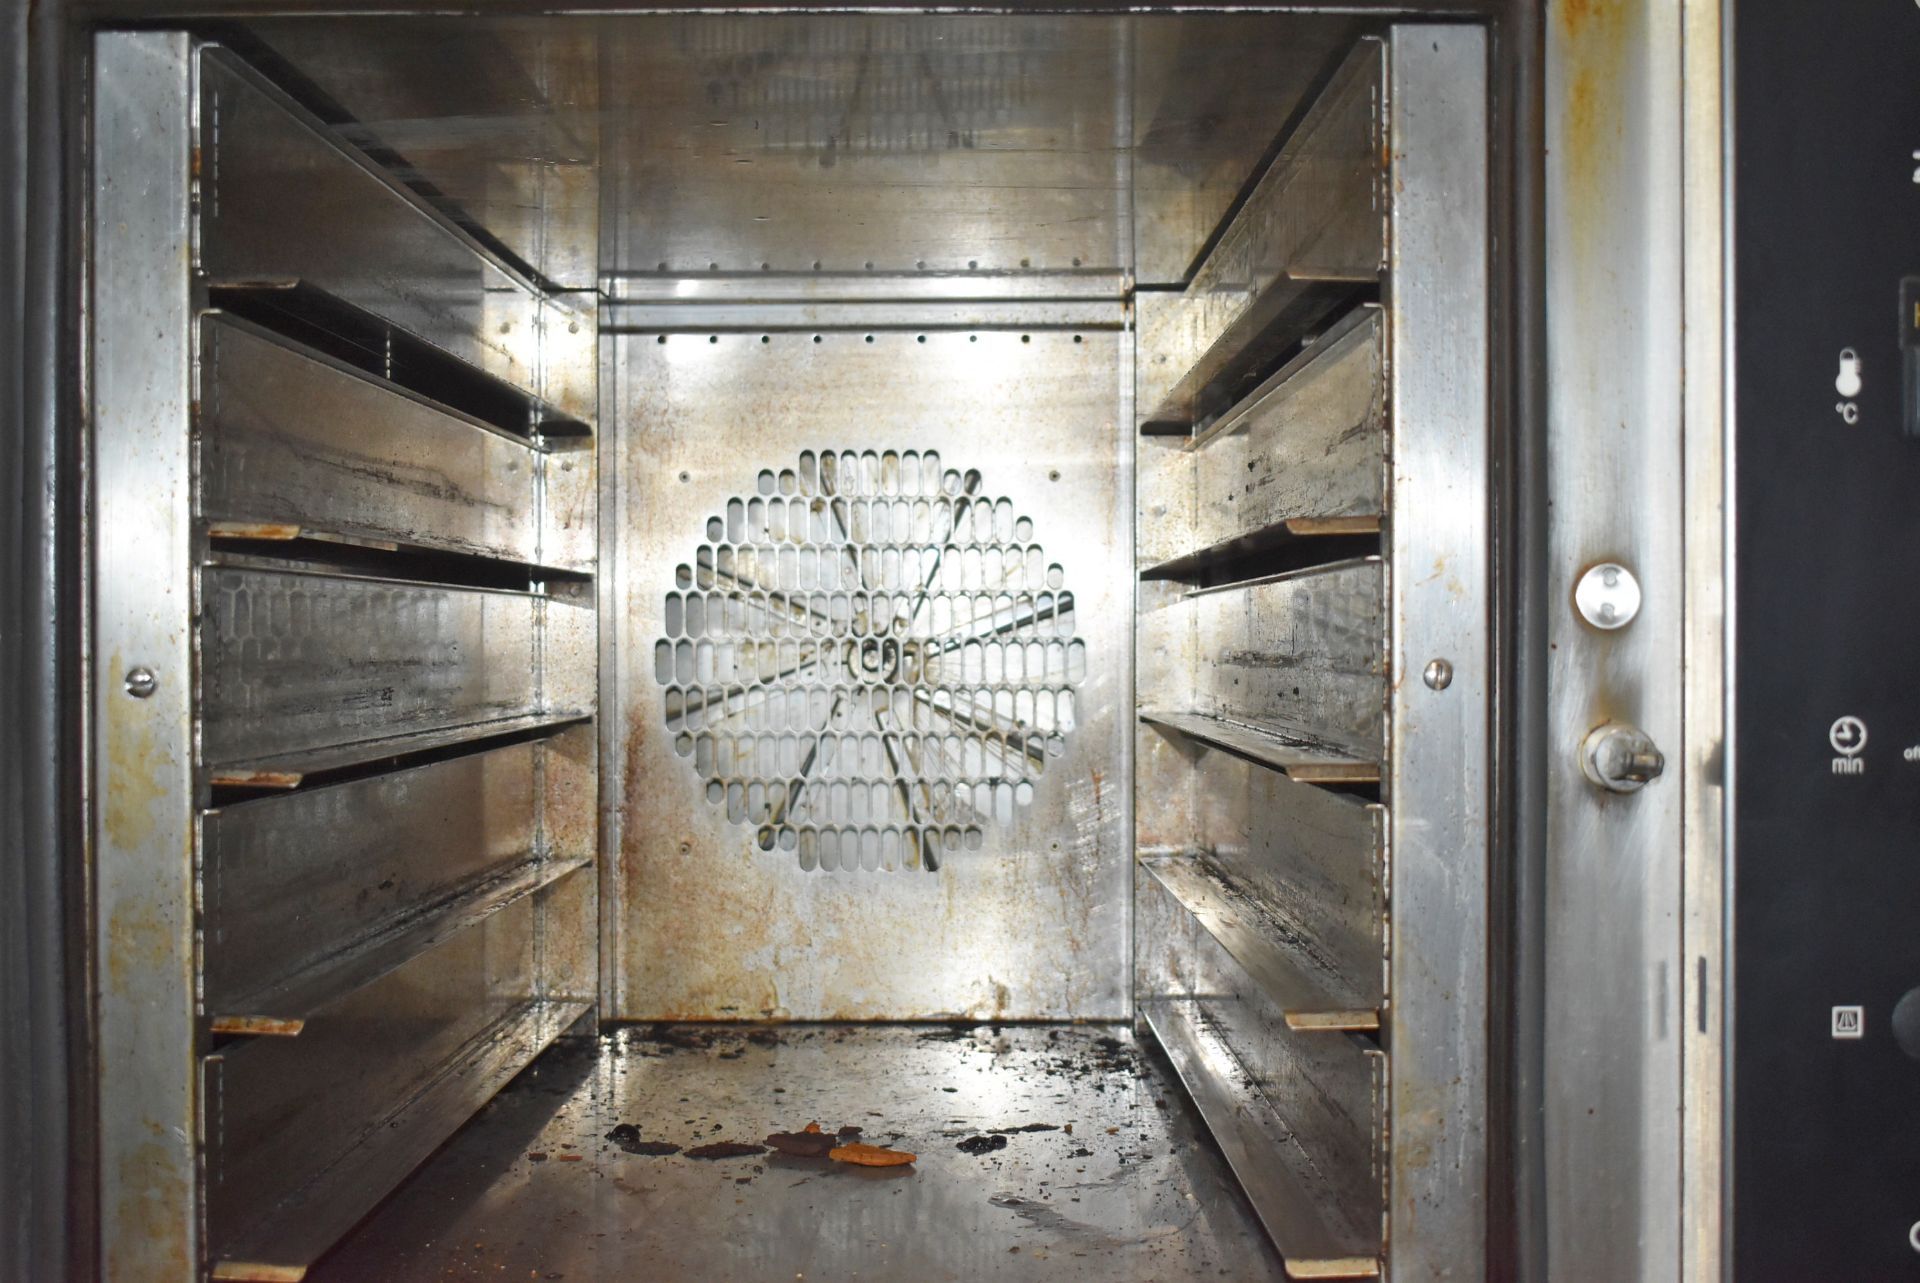 1 x Tom Chandley Double Door Bakey Oven - 3 Phase - Model TC53018 - Removed From Well Known - Image 2 of 8